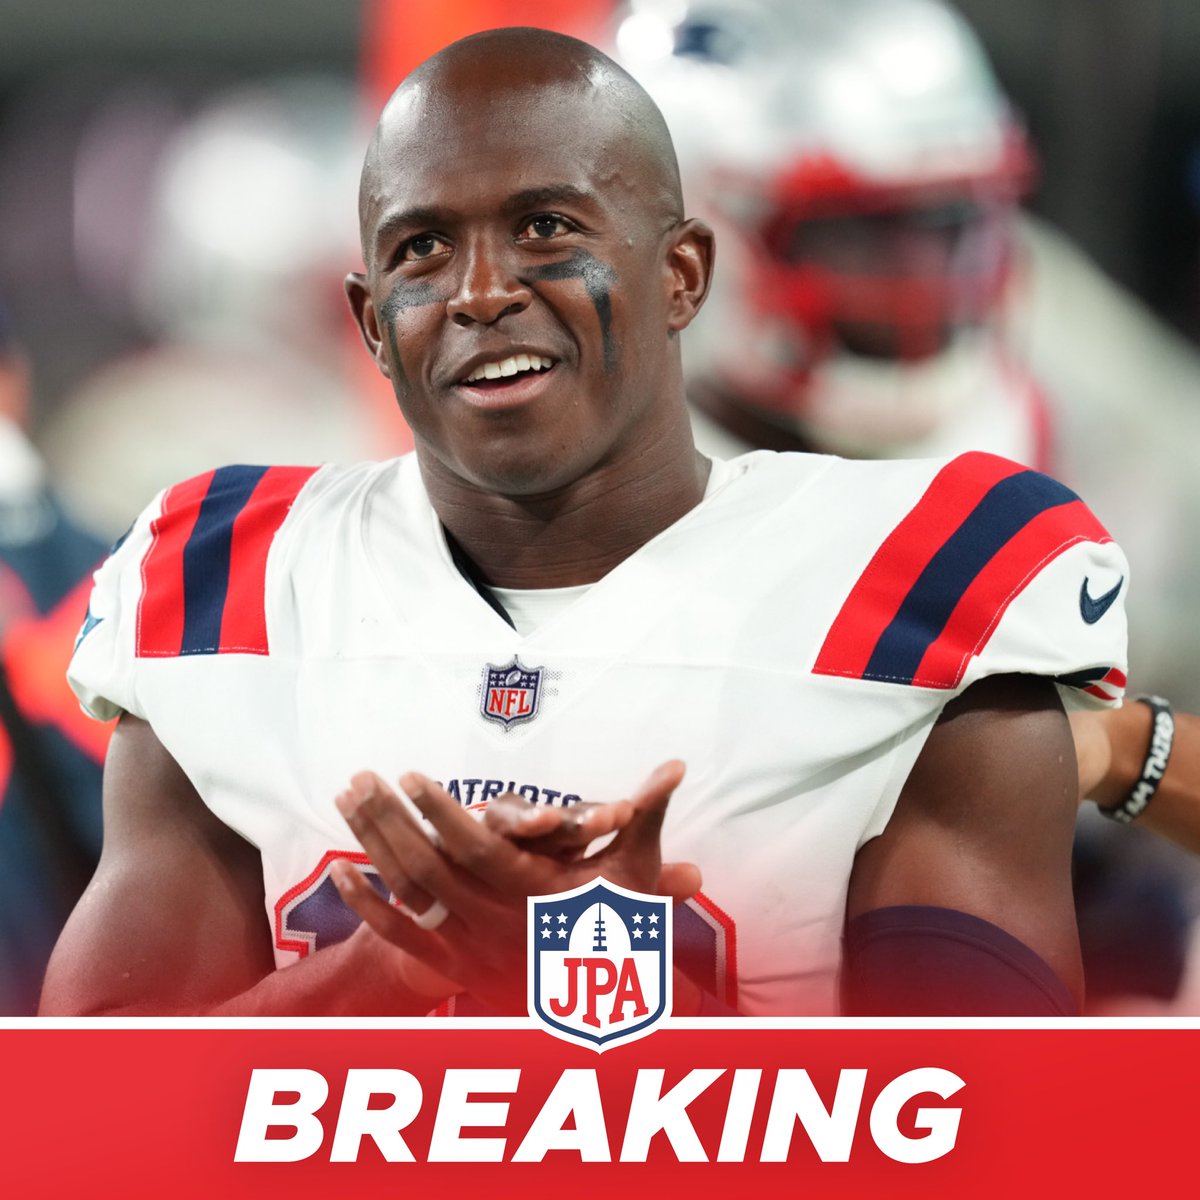 𝗕𝗥𝗘𝗔𝗞𝗜𝗡𝗚: #Patriots legendary special teamer Matthew Slater is retiring.

He has a gold jacket waiting for him.